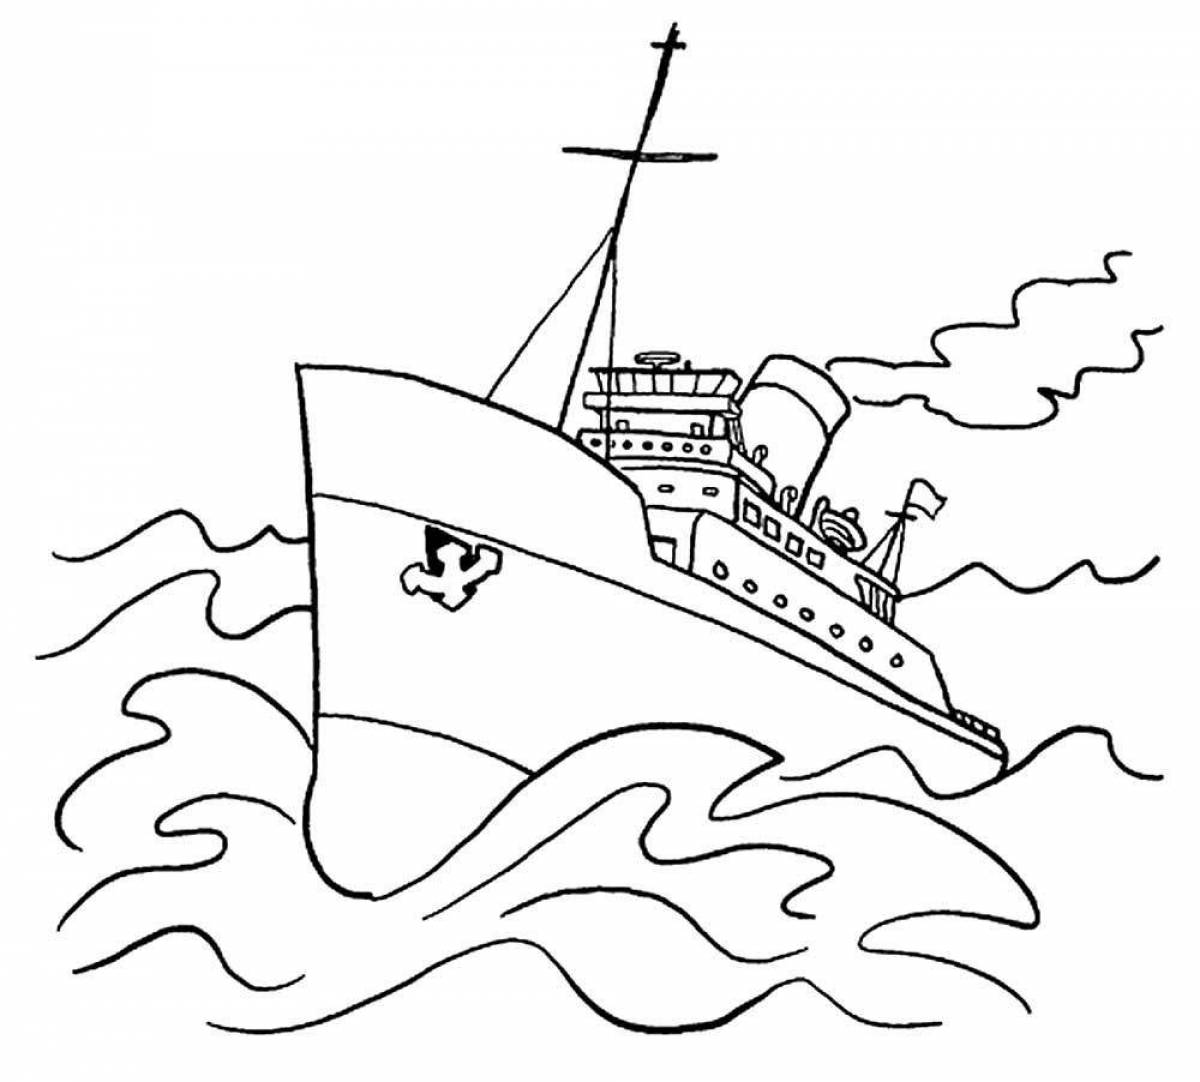 Playful steamship coloring page